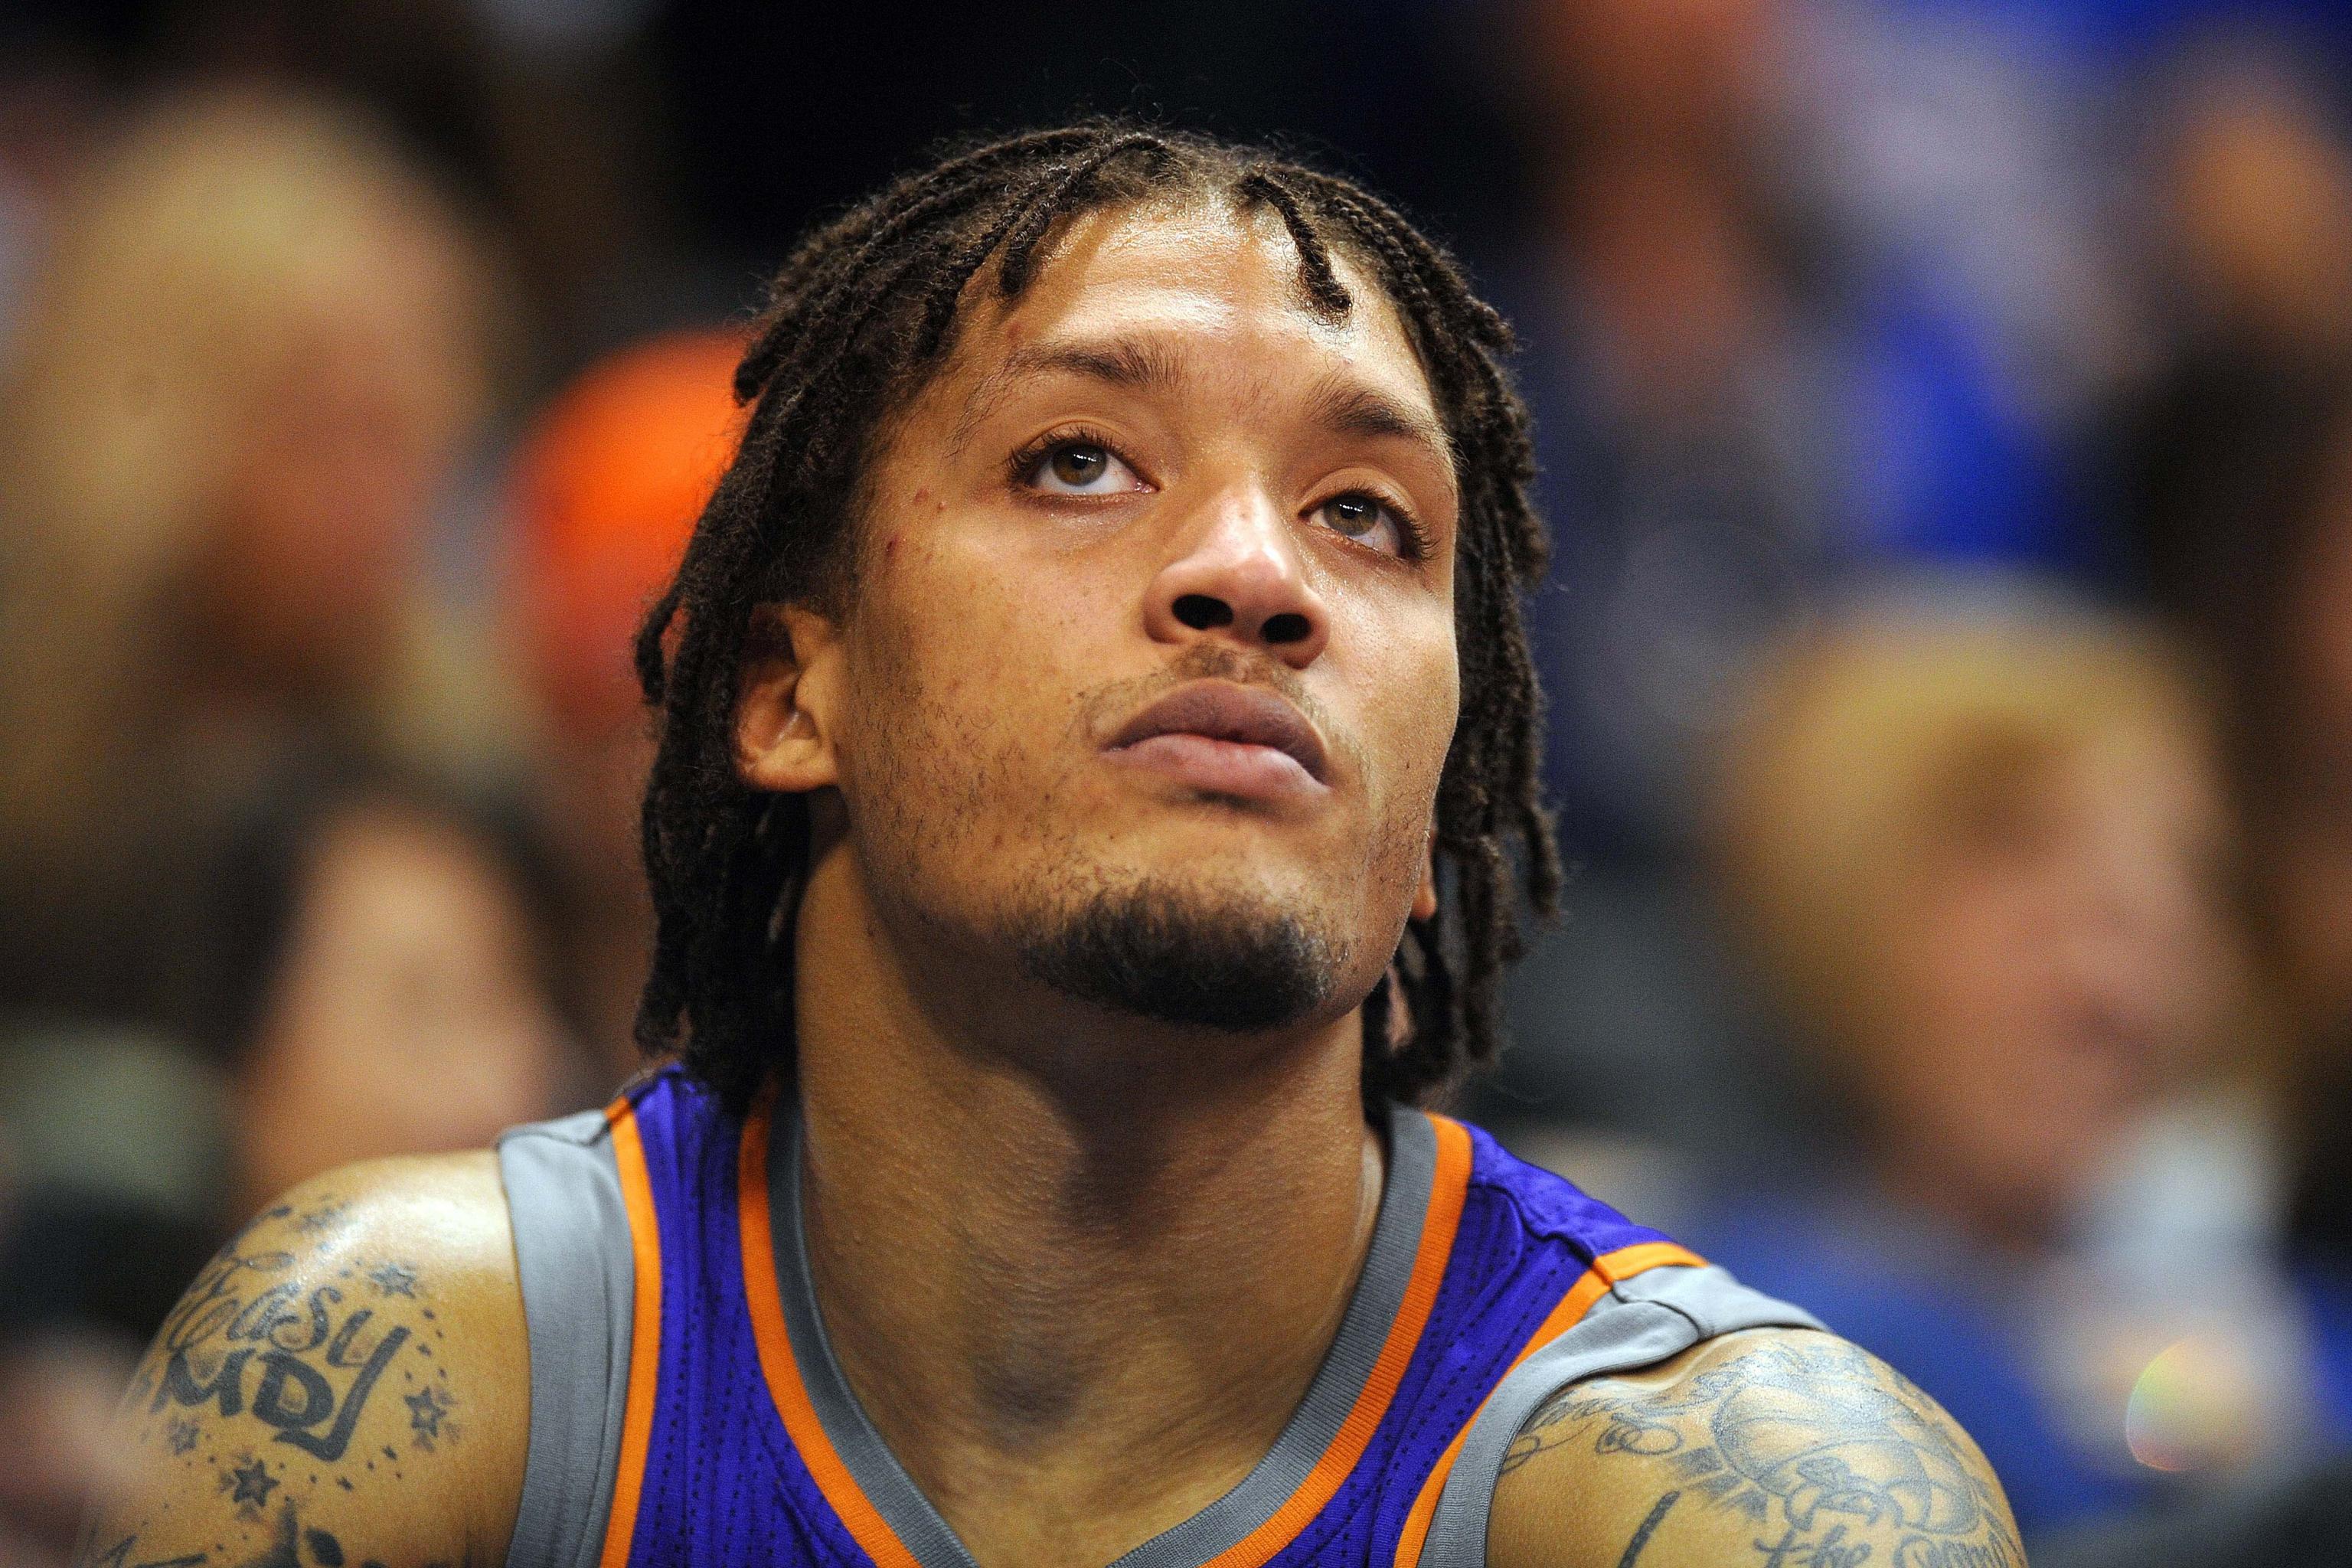 Derrick Rose On The Move? Several Teams Interested: Report